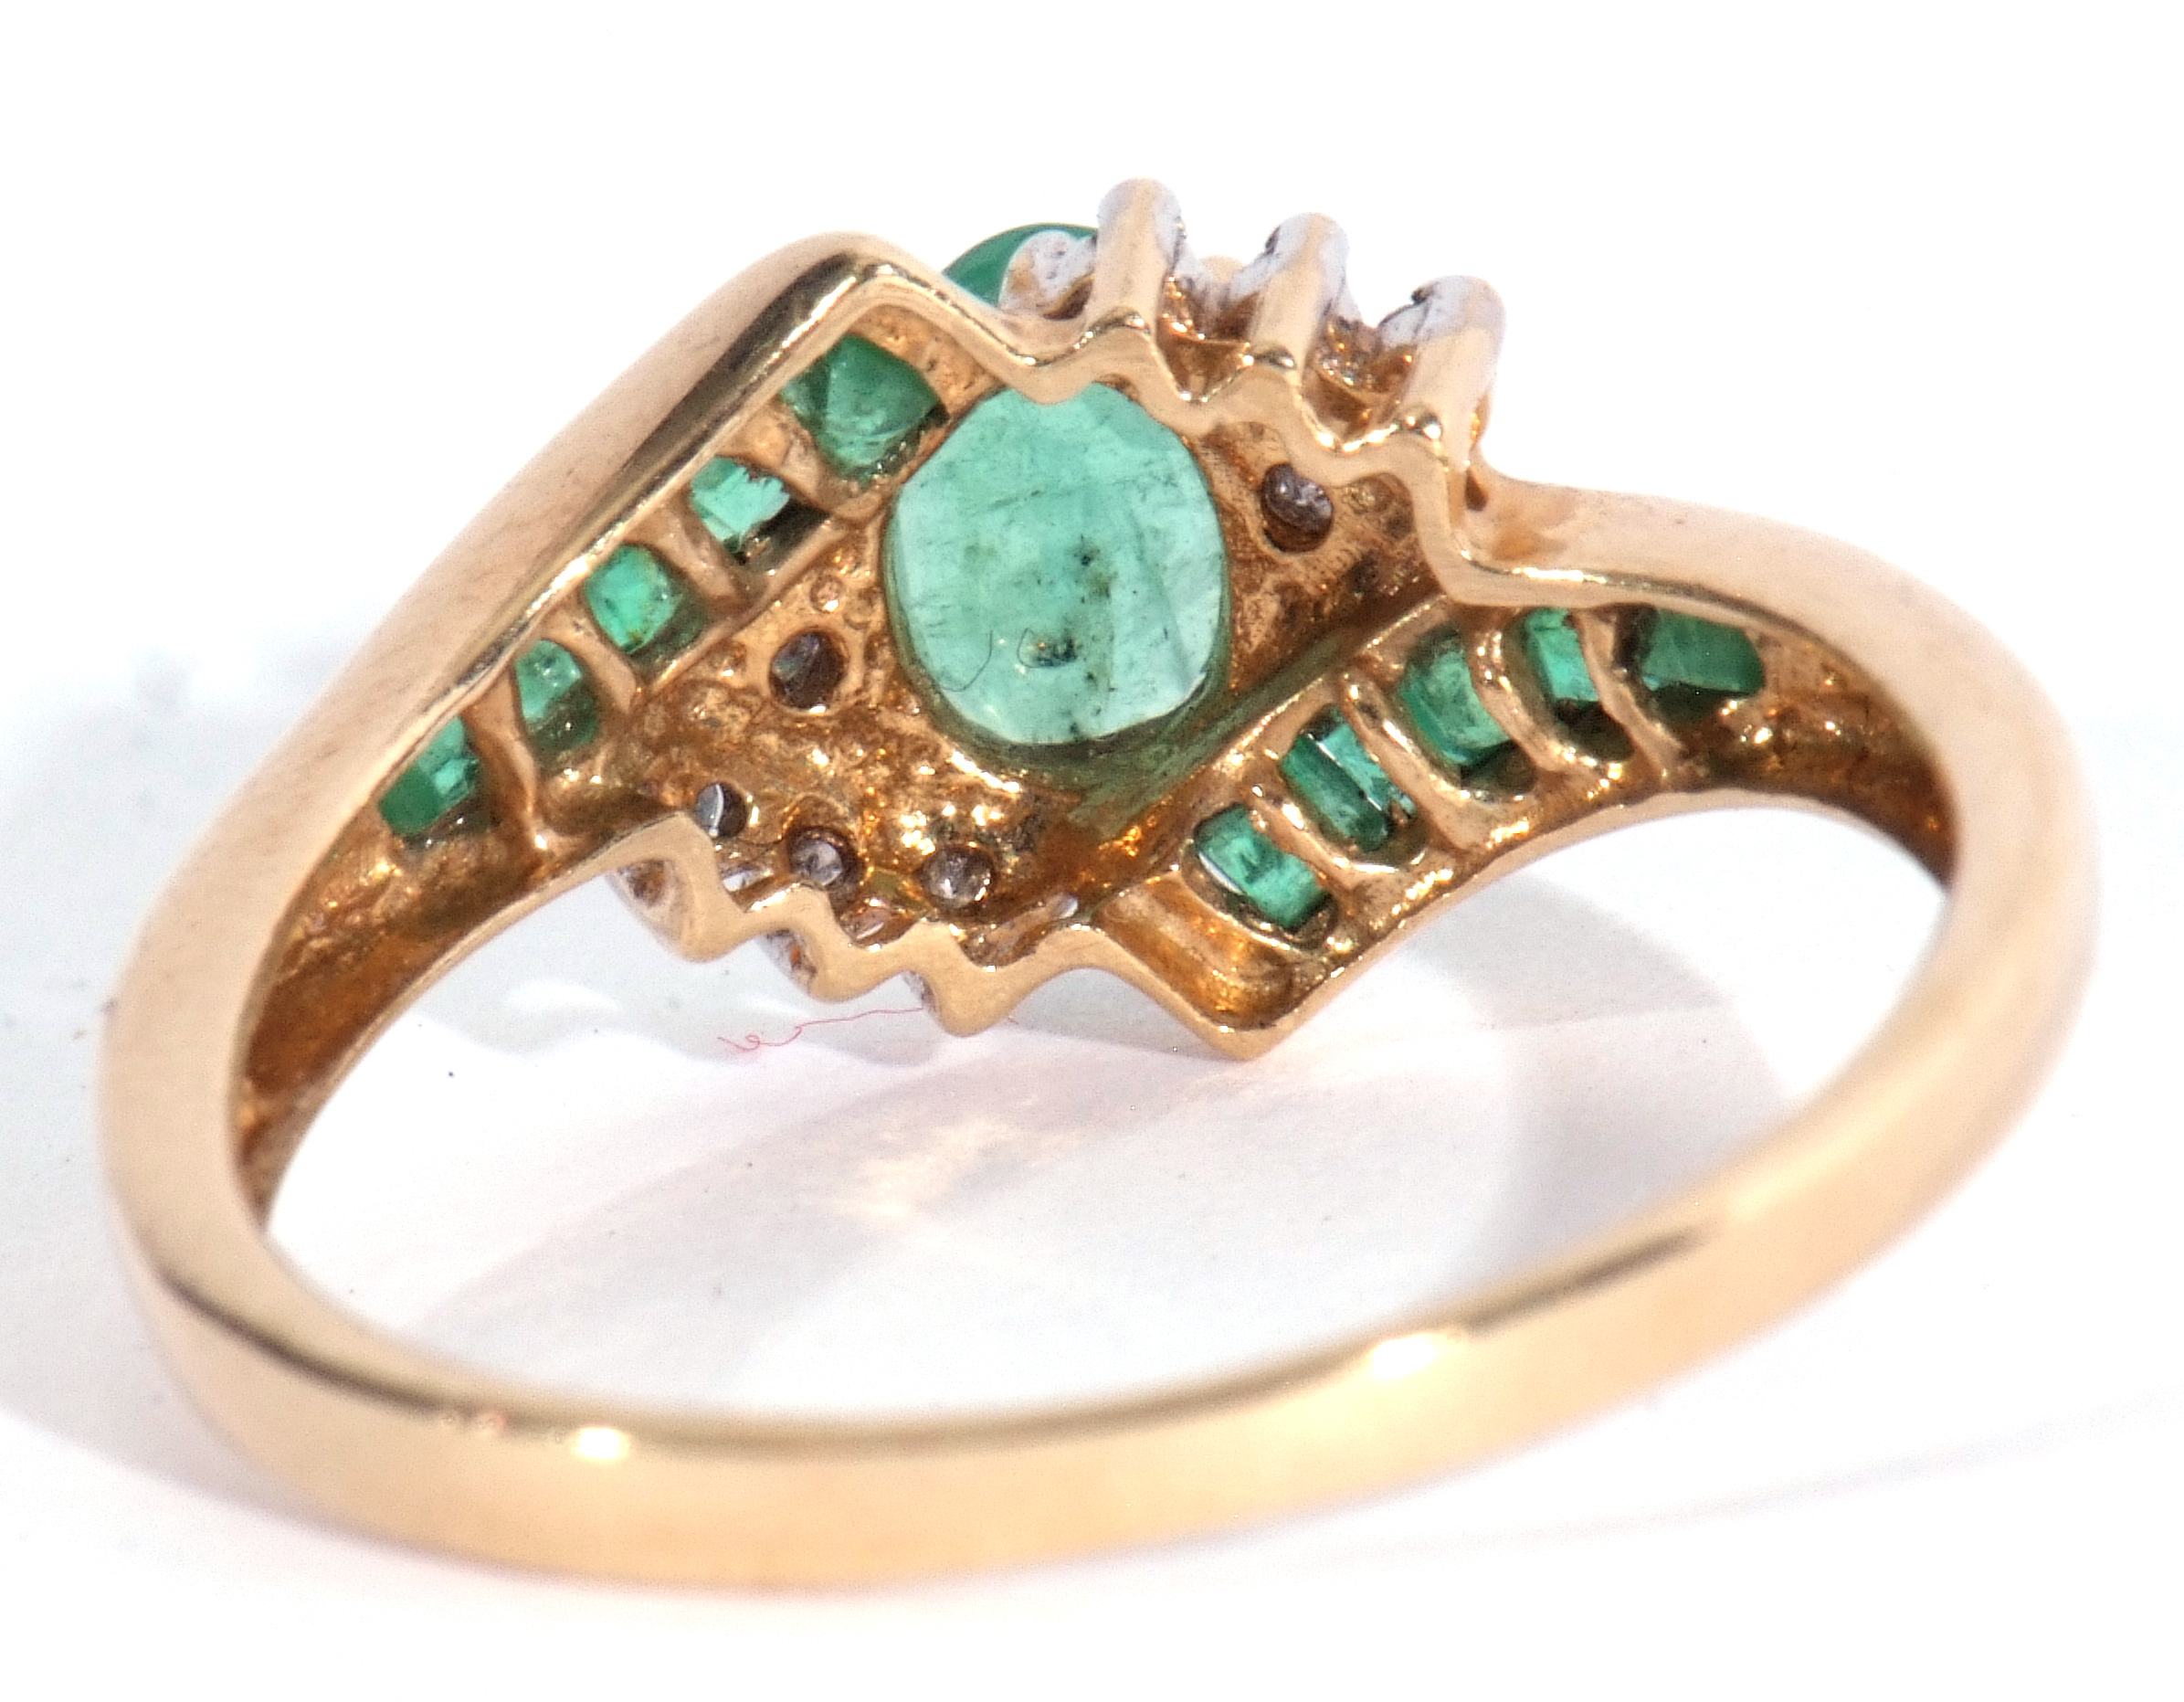 Modern 10K stamped diamond and synthetic emerald cluster ring, centring an oval faceted stone - Image 4 of 7